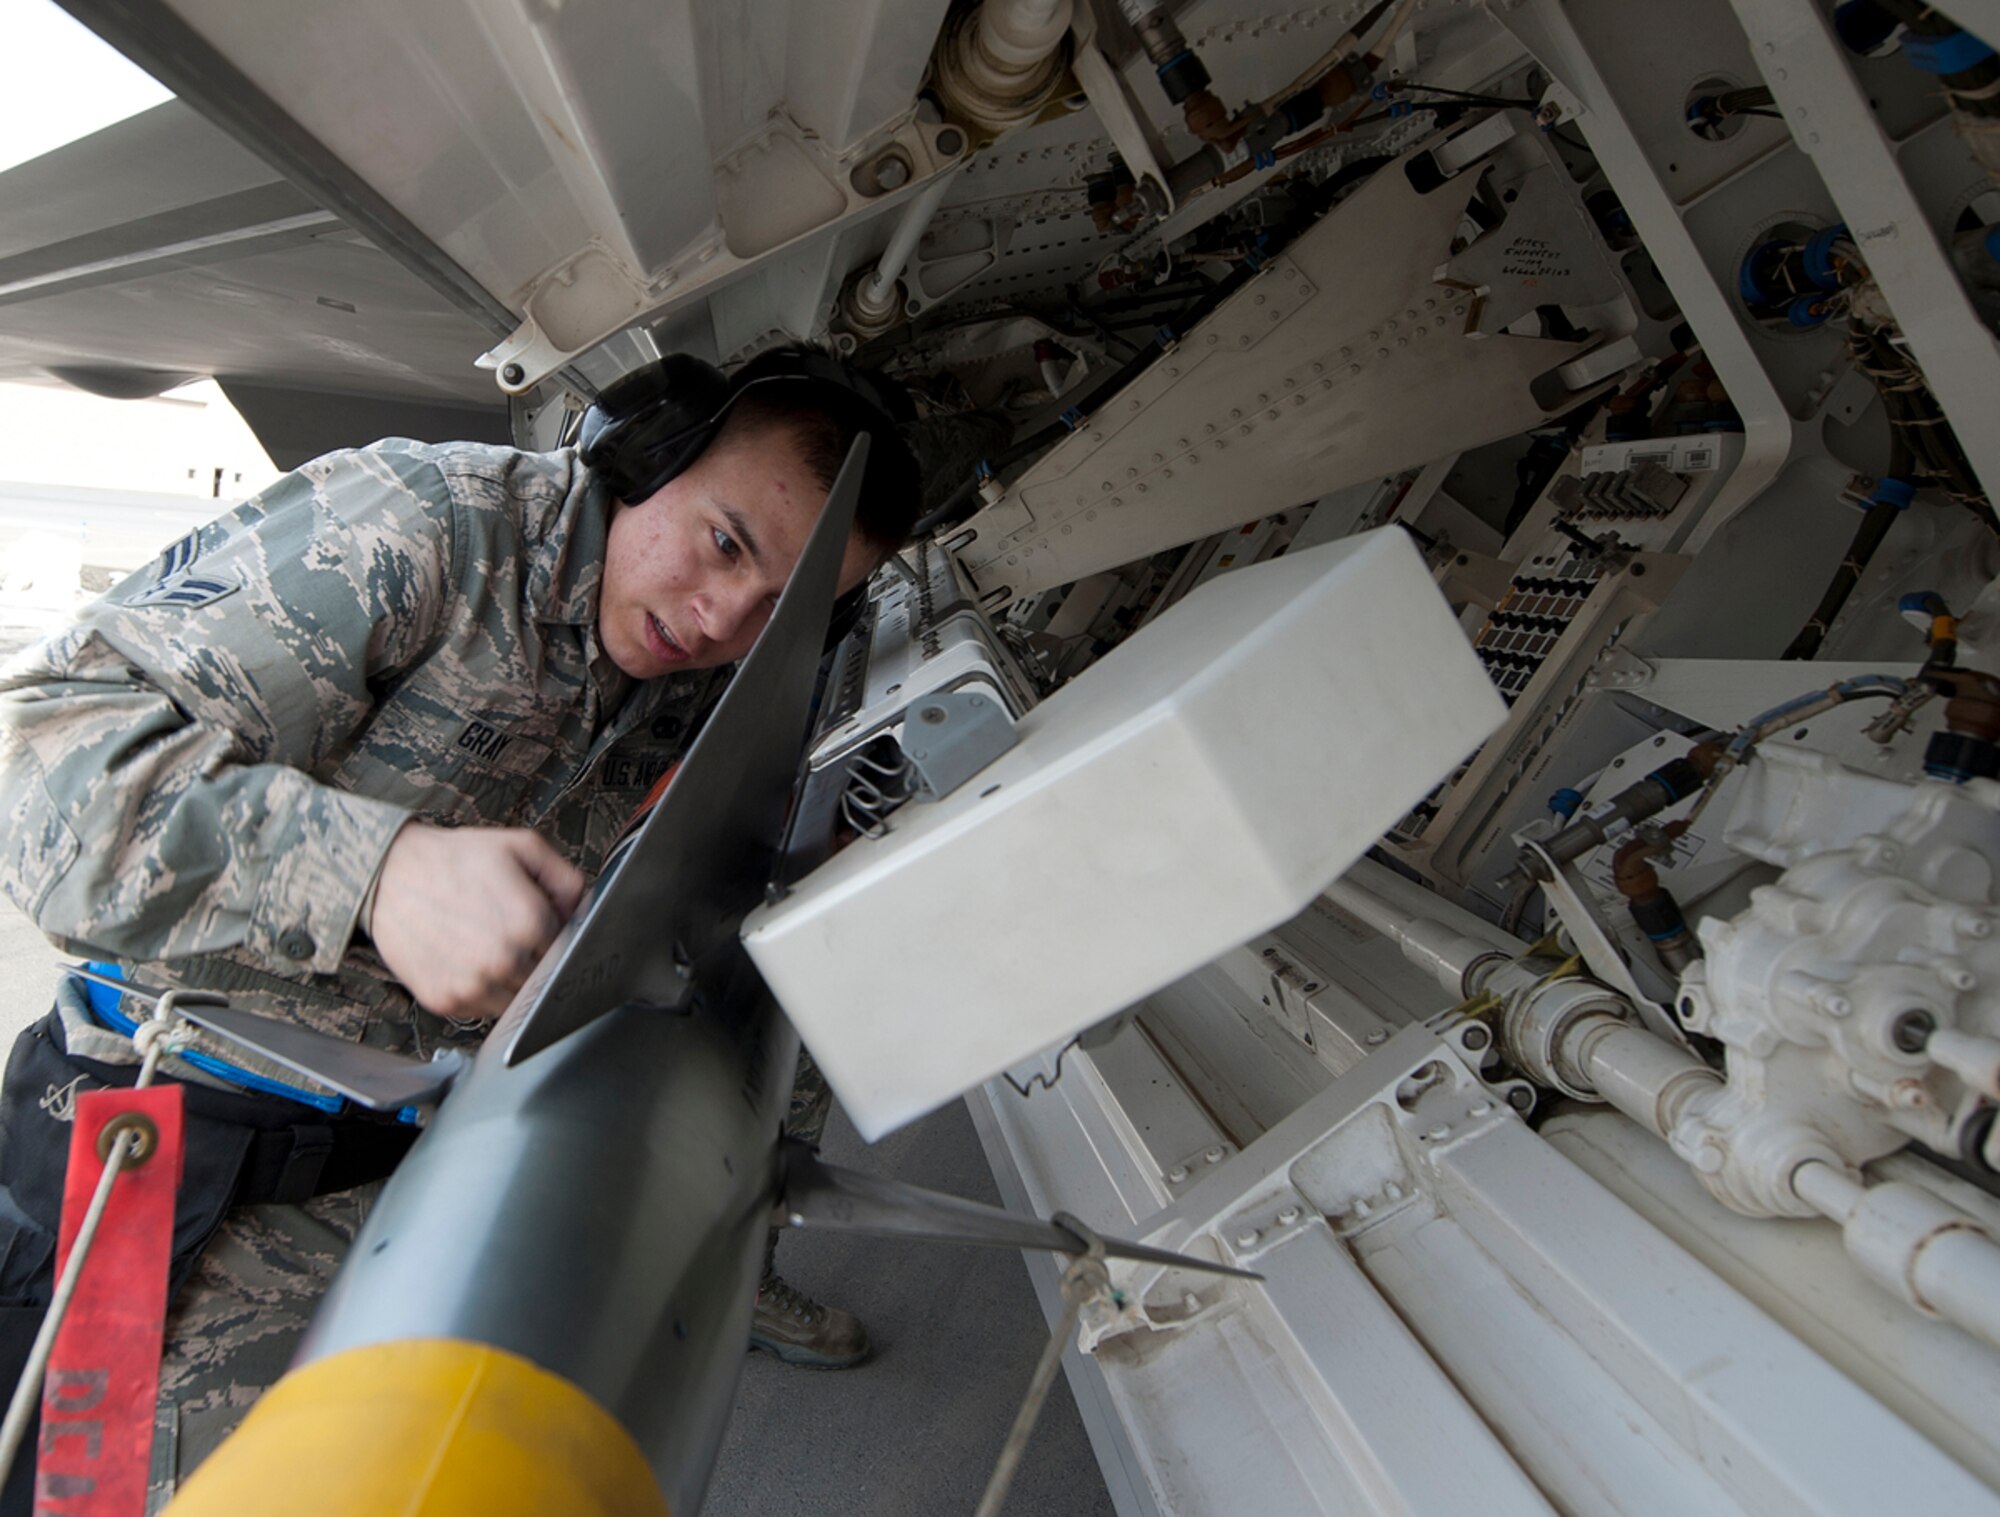 Airman 1st Class Christian Gray secures an AIM-9 Sidewinder missile onto an F-22 Raptor during a 3rd Maintenance Group load crew competition at Joint Base Elmendorf-Richardson, Alaska, April 18, 2014. Gray is a 525th Aircraft Maintenance Unit load crew member and native of Las Angeles. (U.S. Air Force photo/Staff Sgt. Robert Barnett)